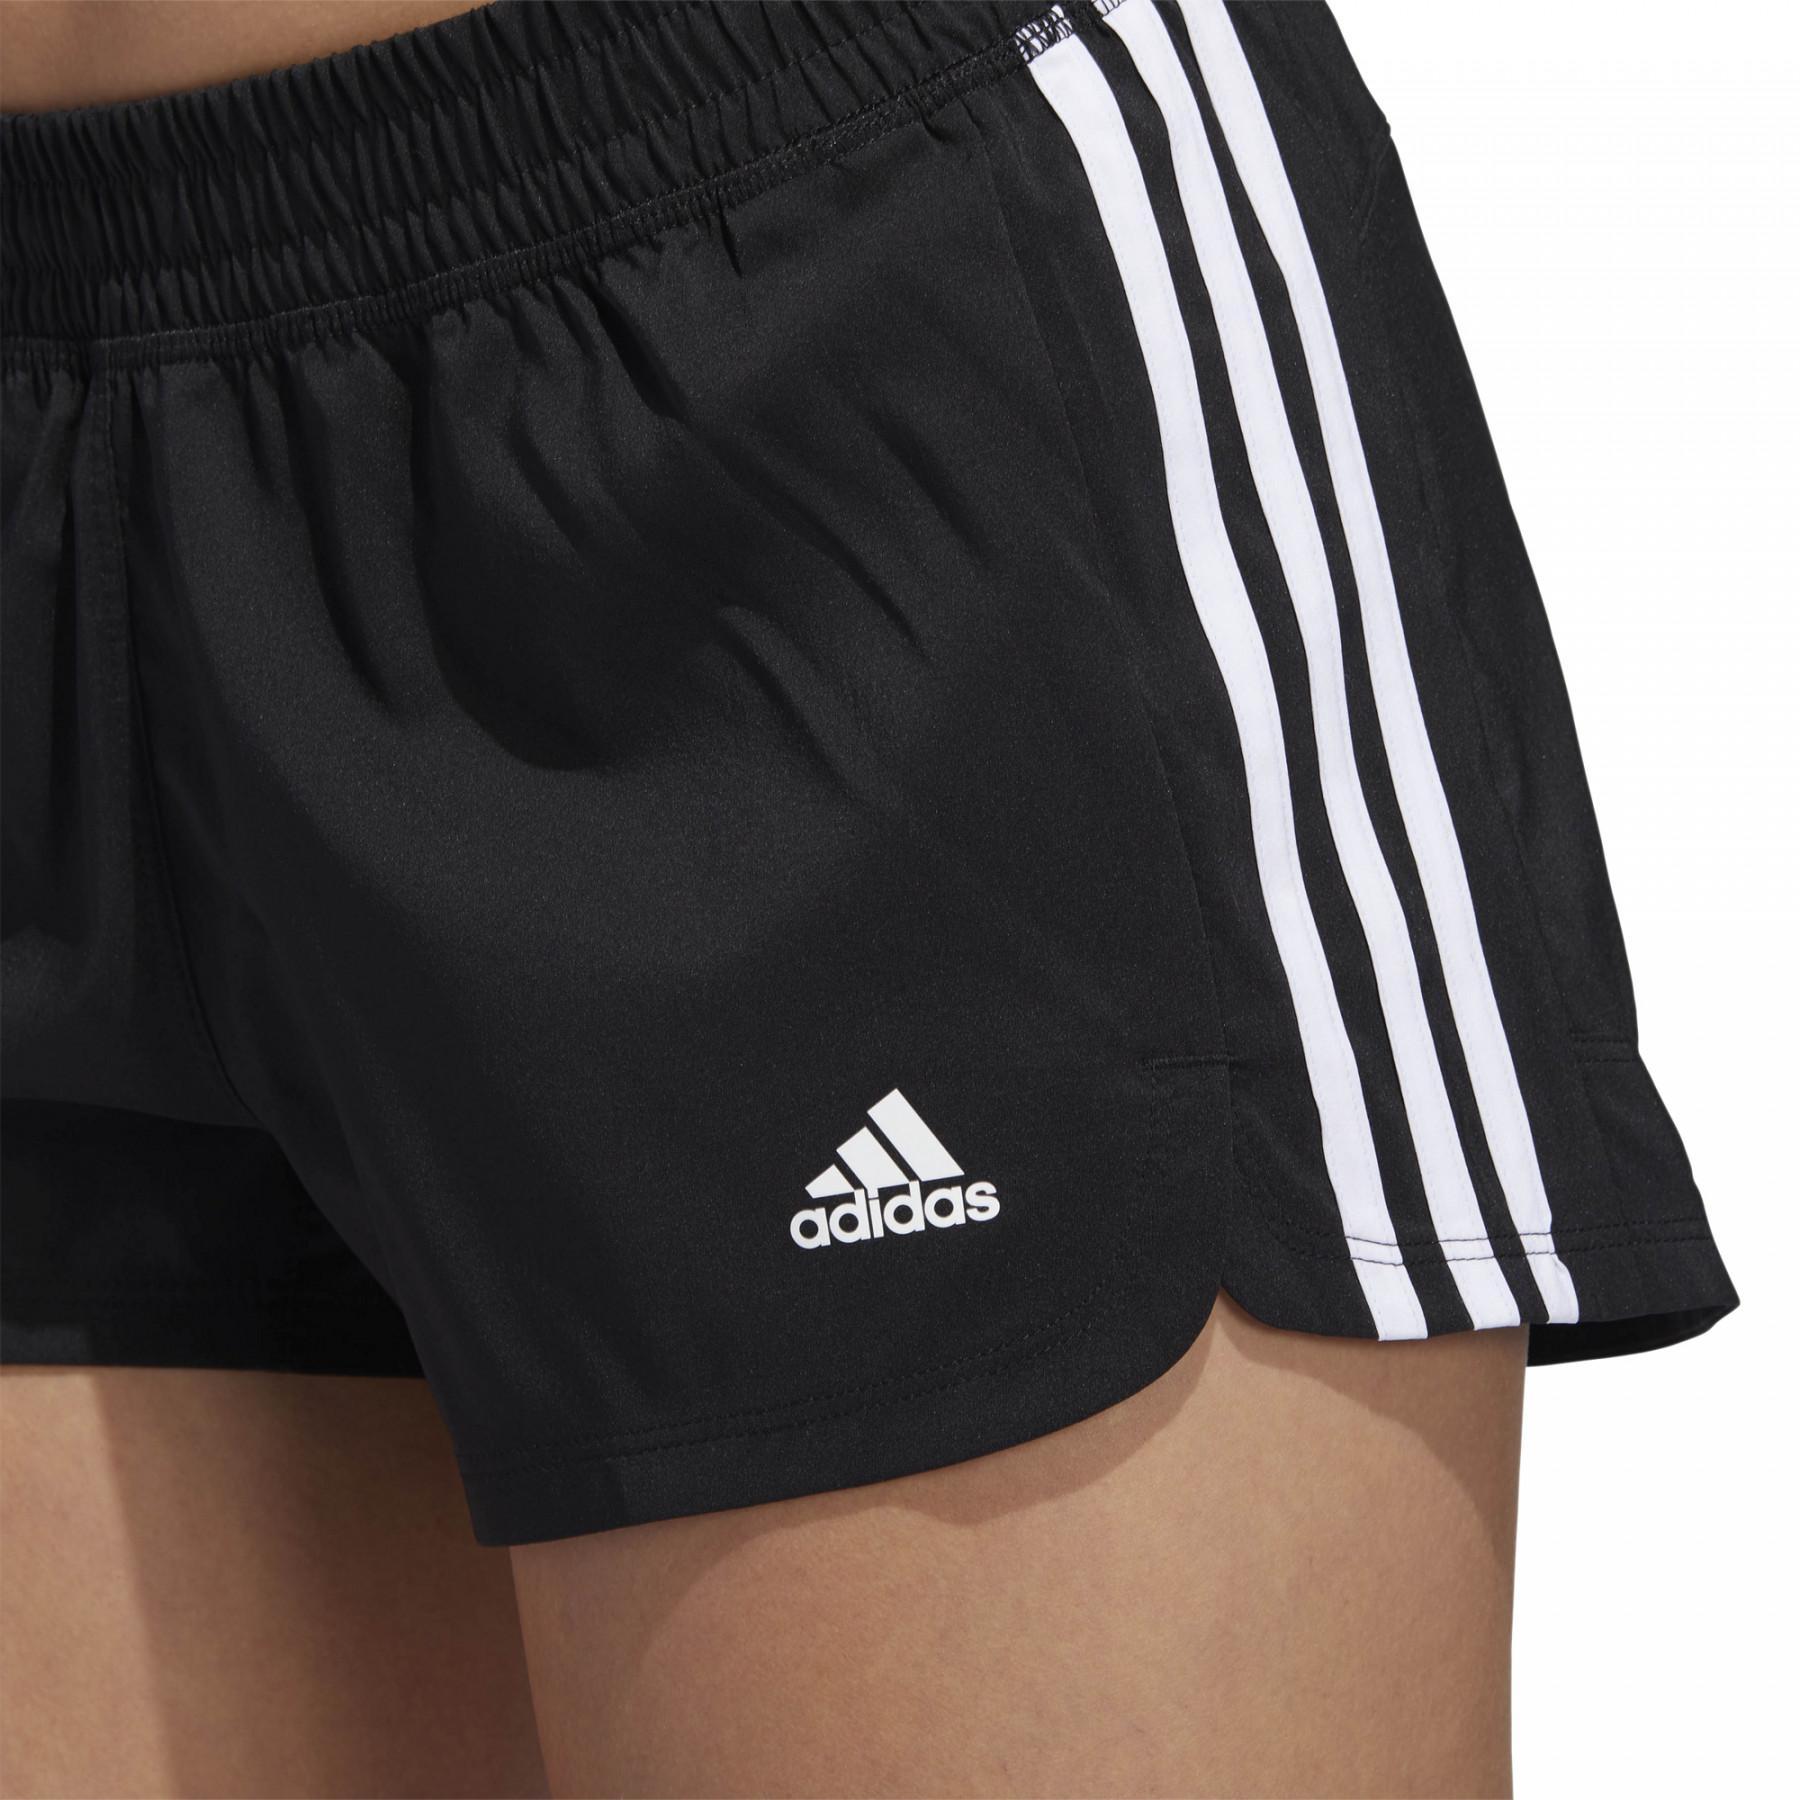 Short femme adidas Pacer 3 bandes Woven